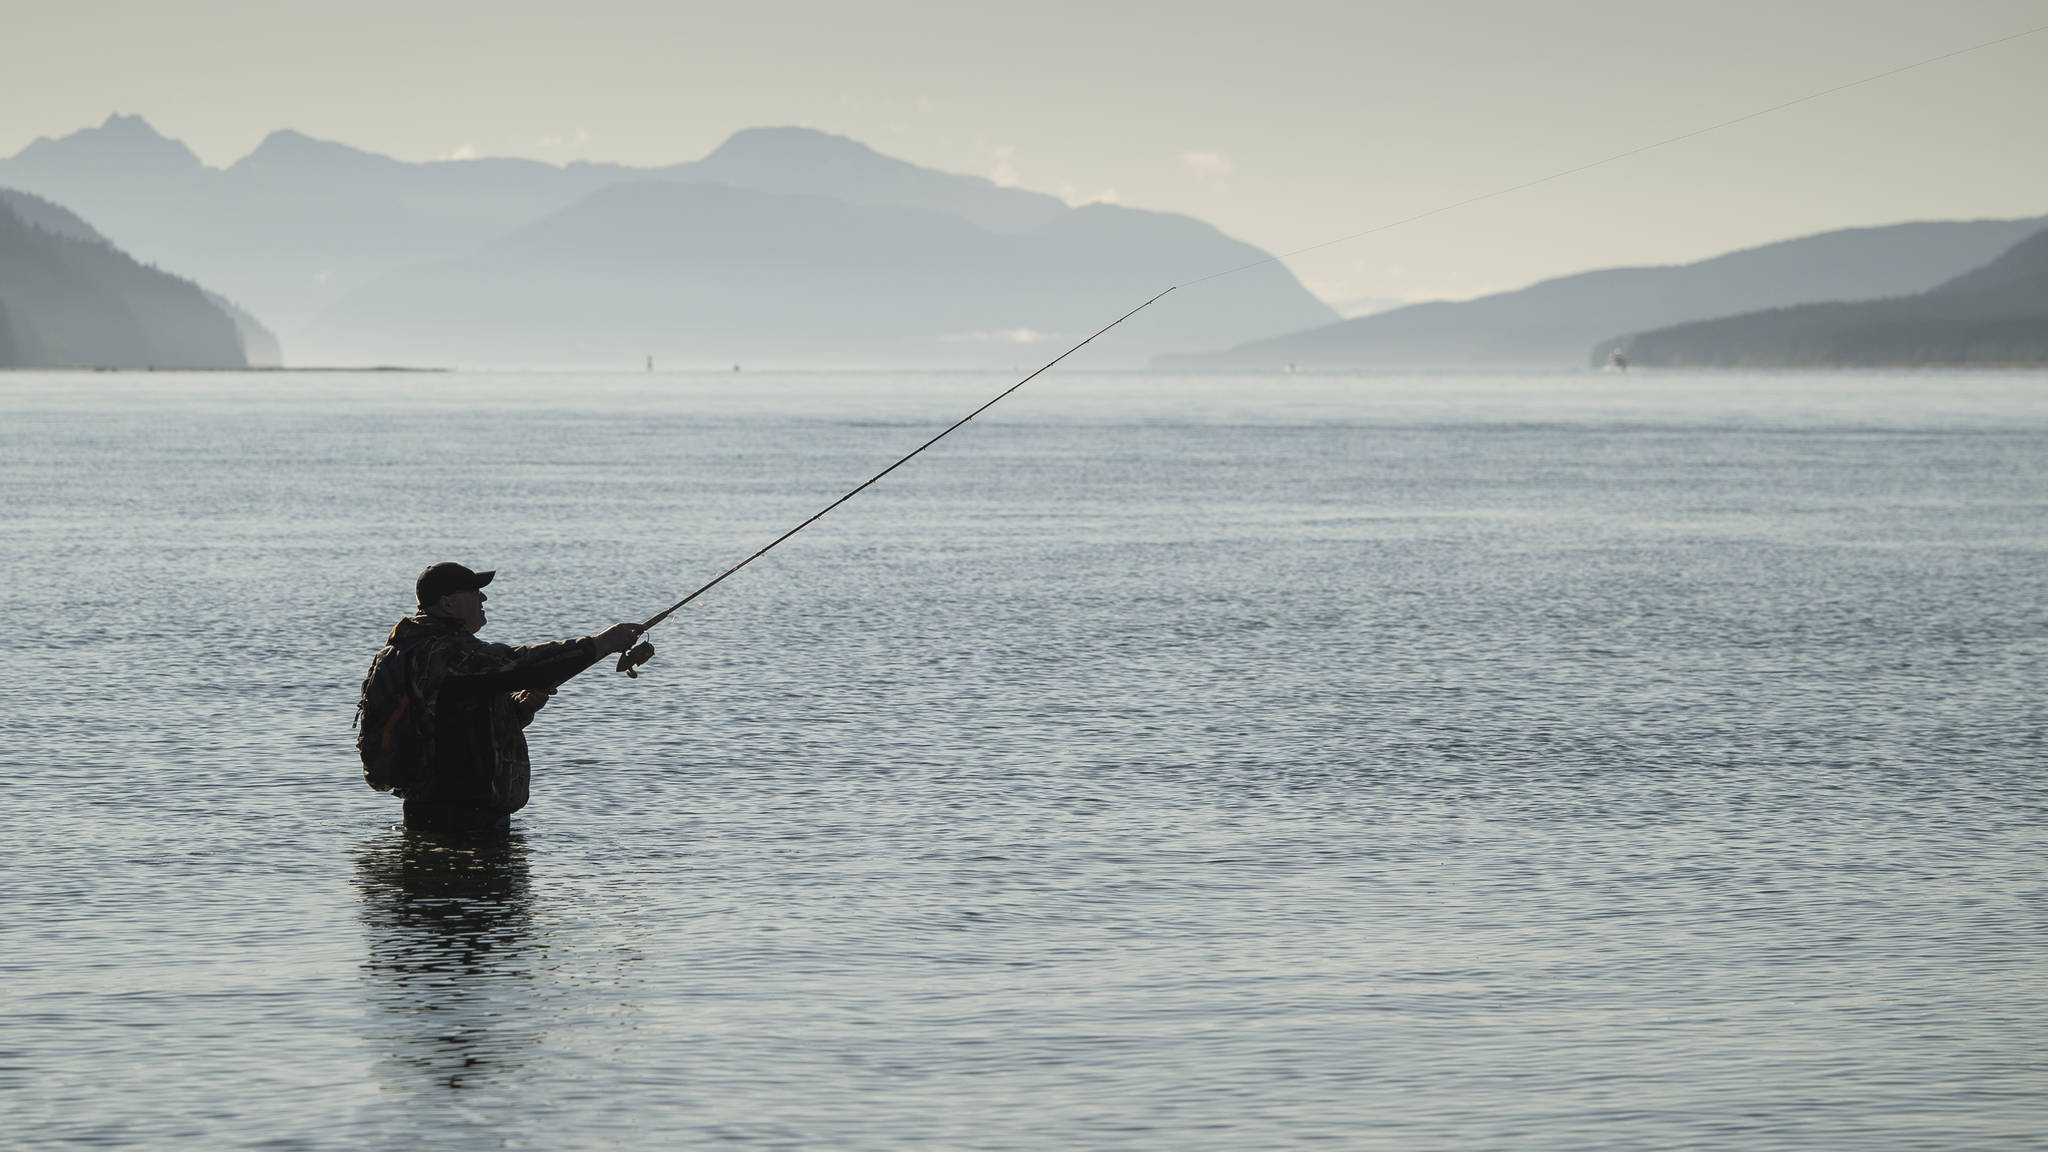 Robert Kent enjoys his day off fishing for returning silver salmon in Gastineau Channel on Monday, Sept. 3, 2018. Kent said, “Can’t help but enjoy this day. It’s absolutely amazing.” (Michael Penn | Juneau Empire)